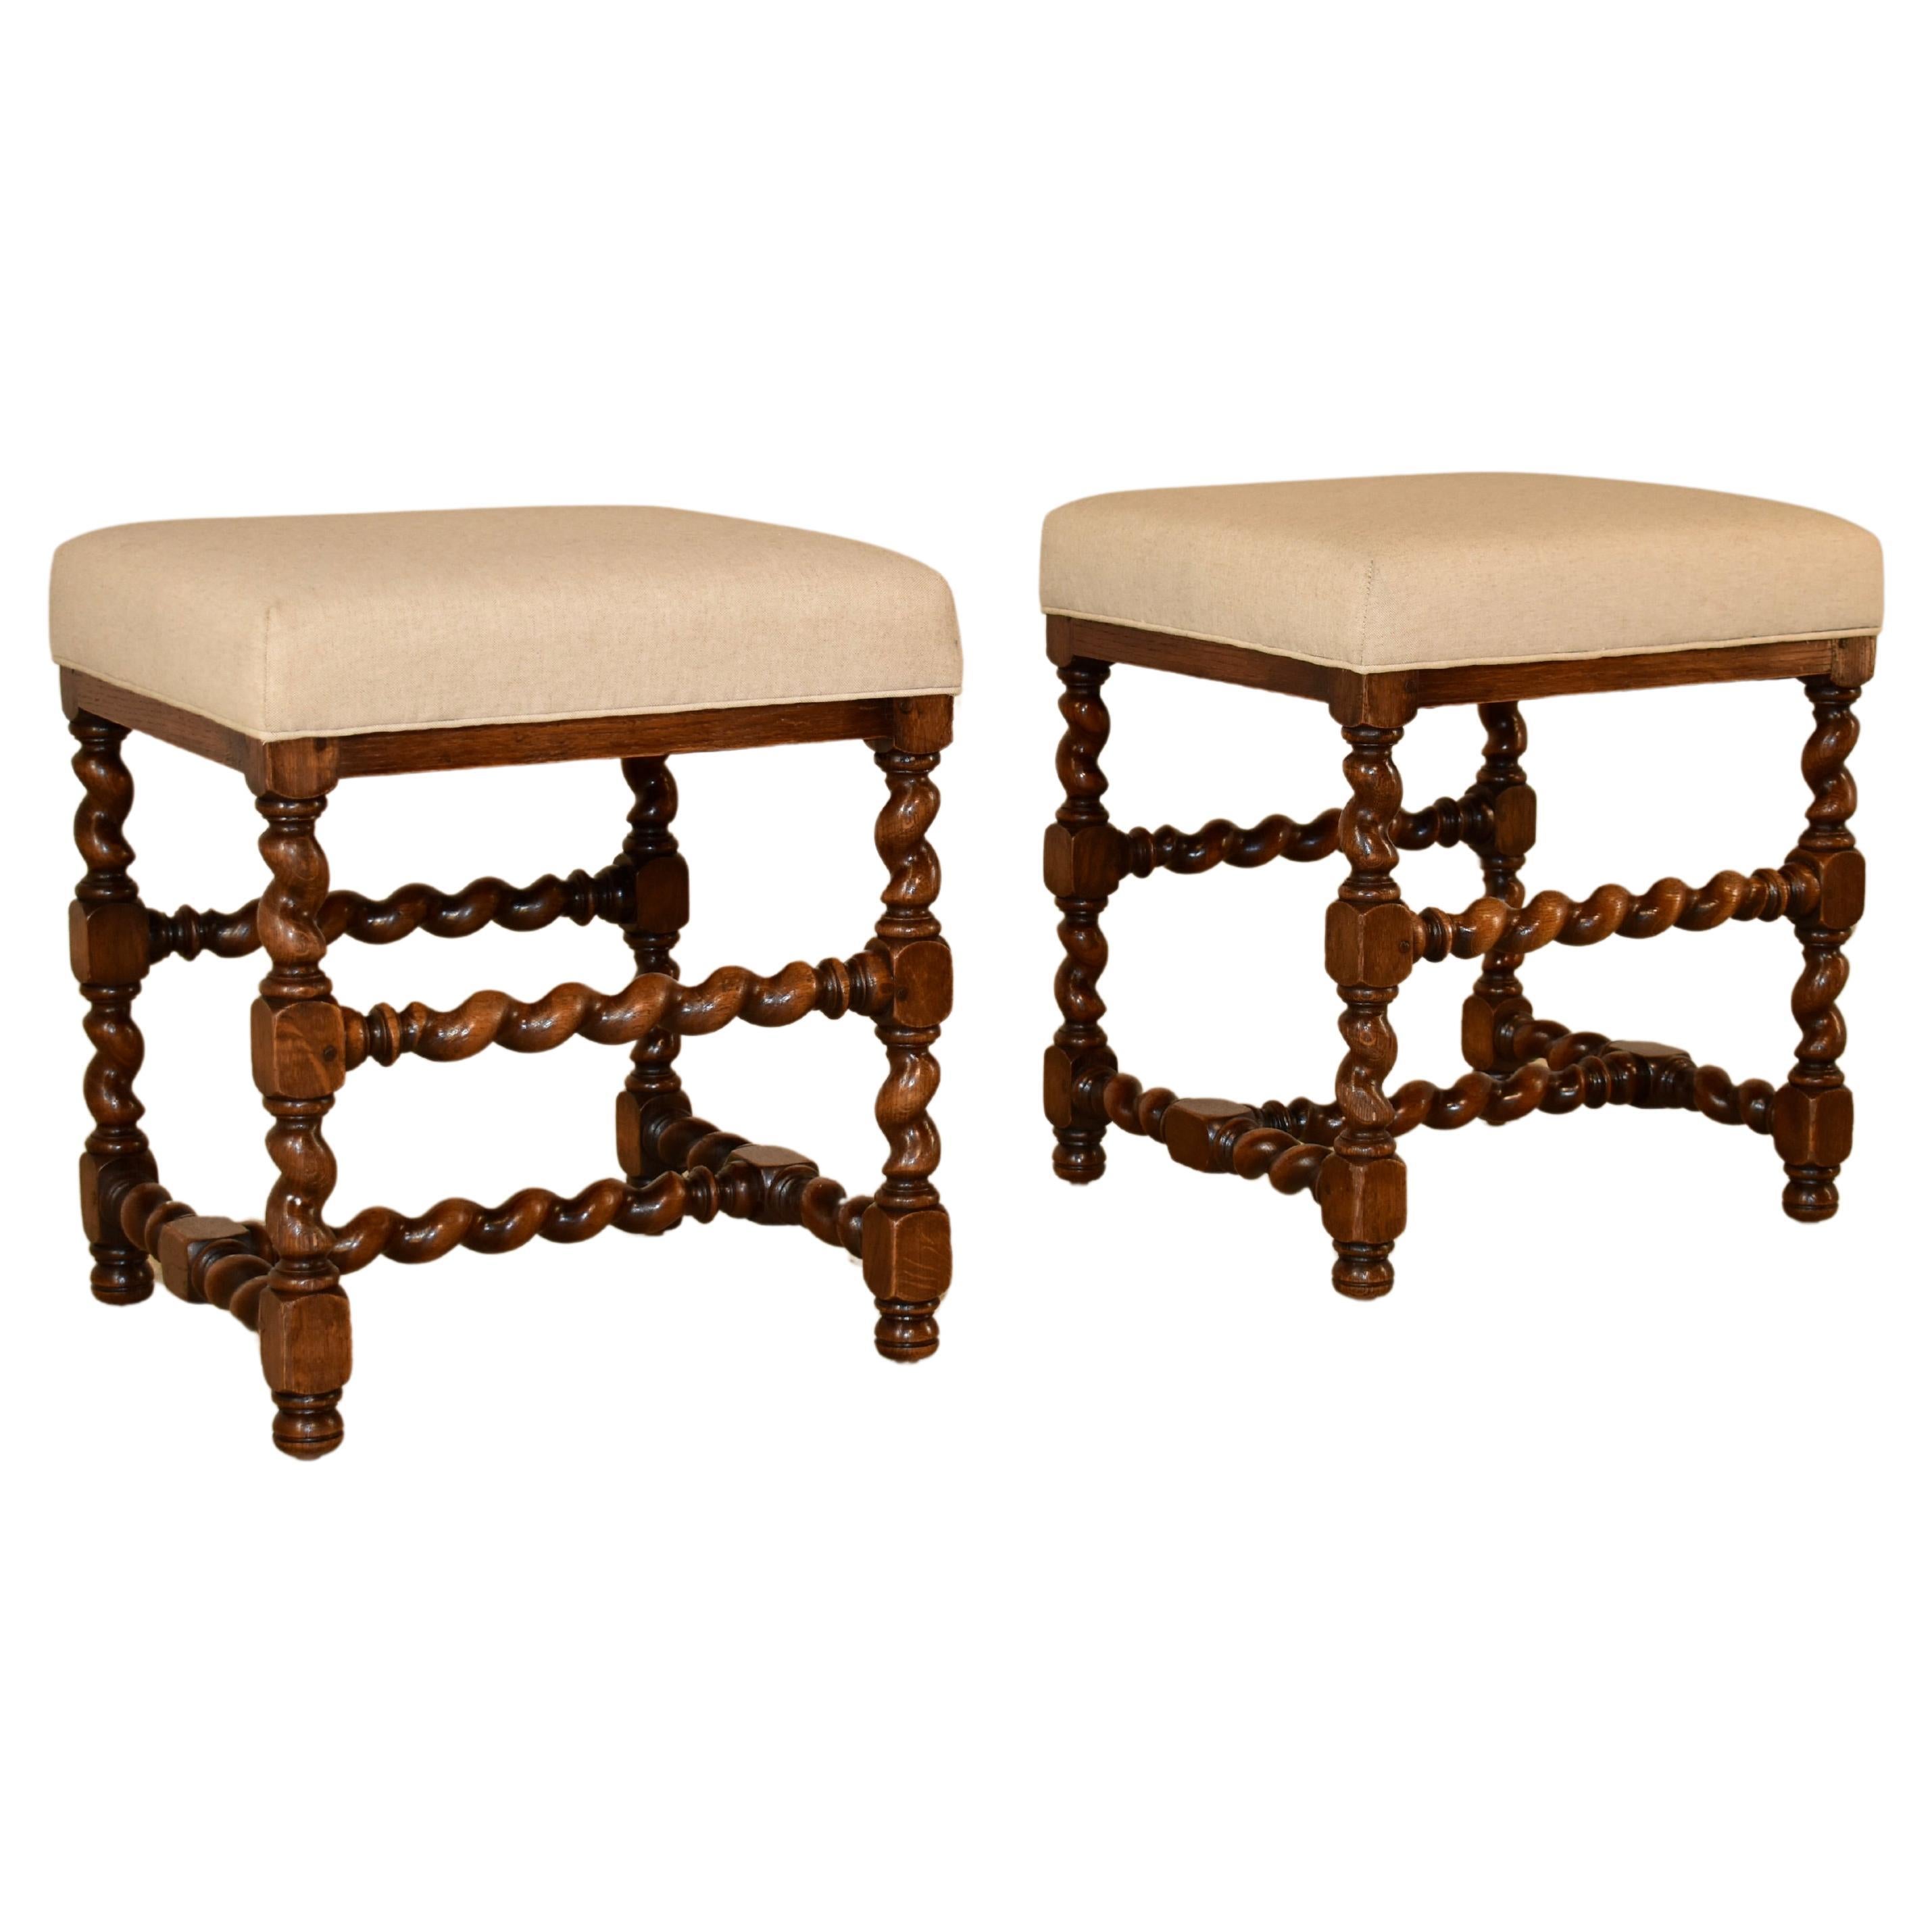 Pair of 19th Century Turned French Stools